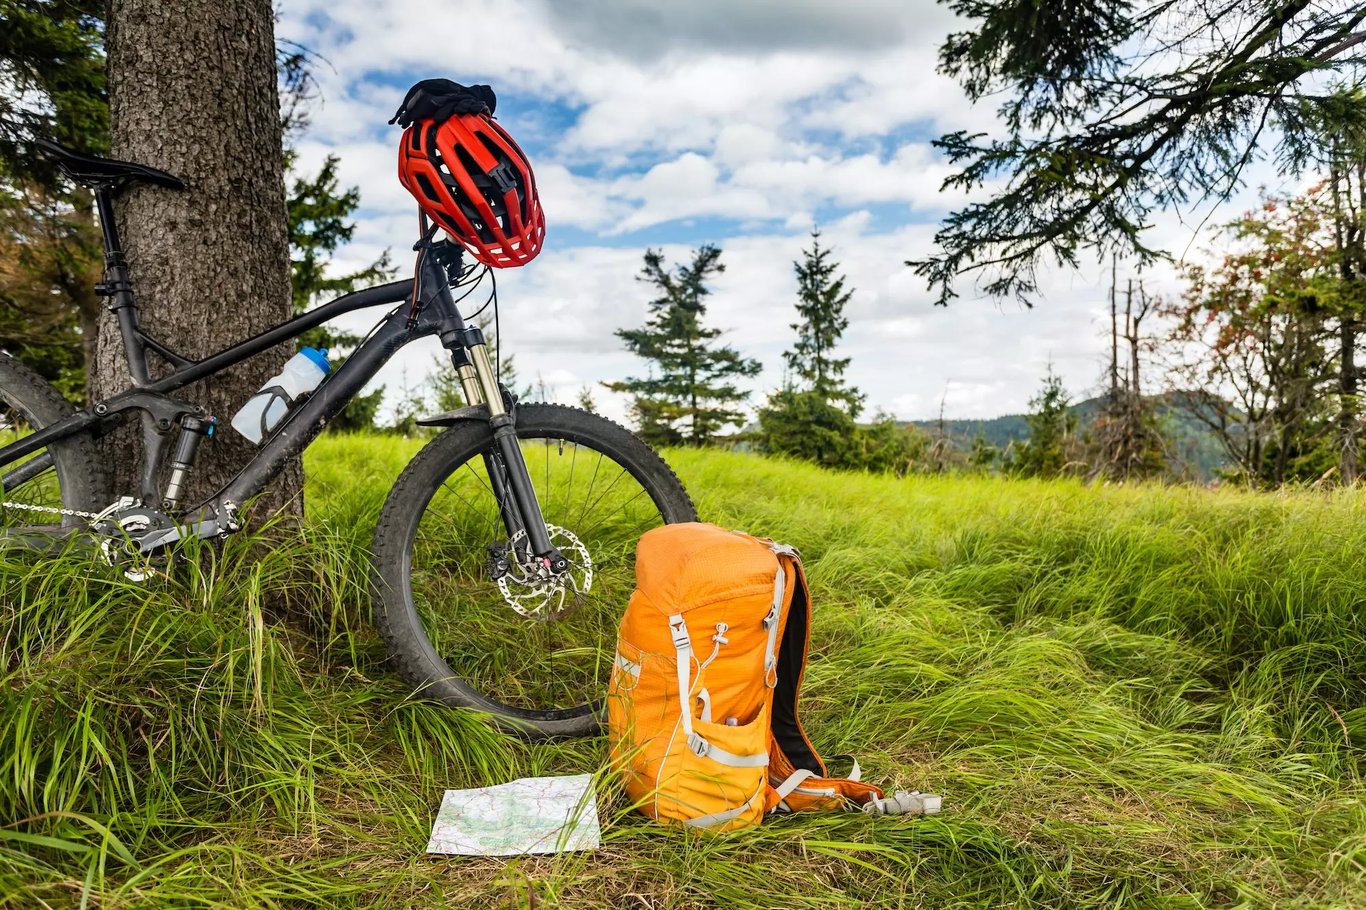 5 items you must bring on a bike trip